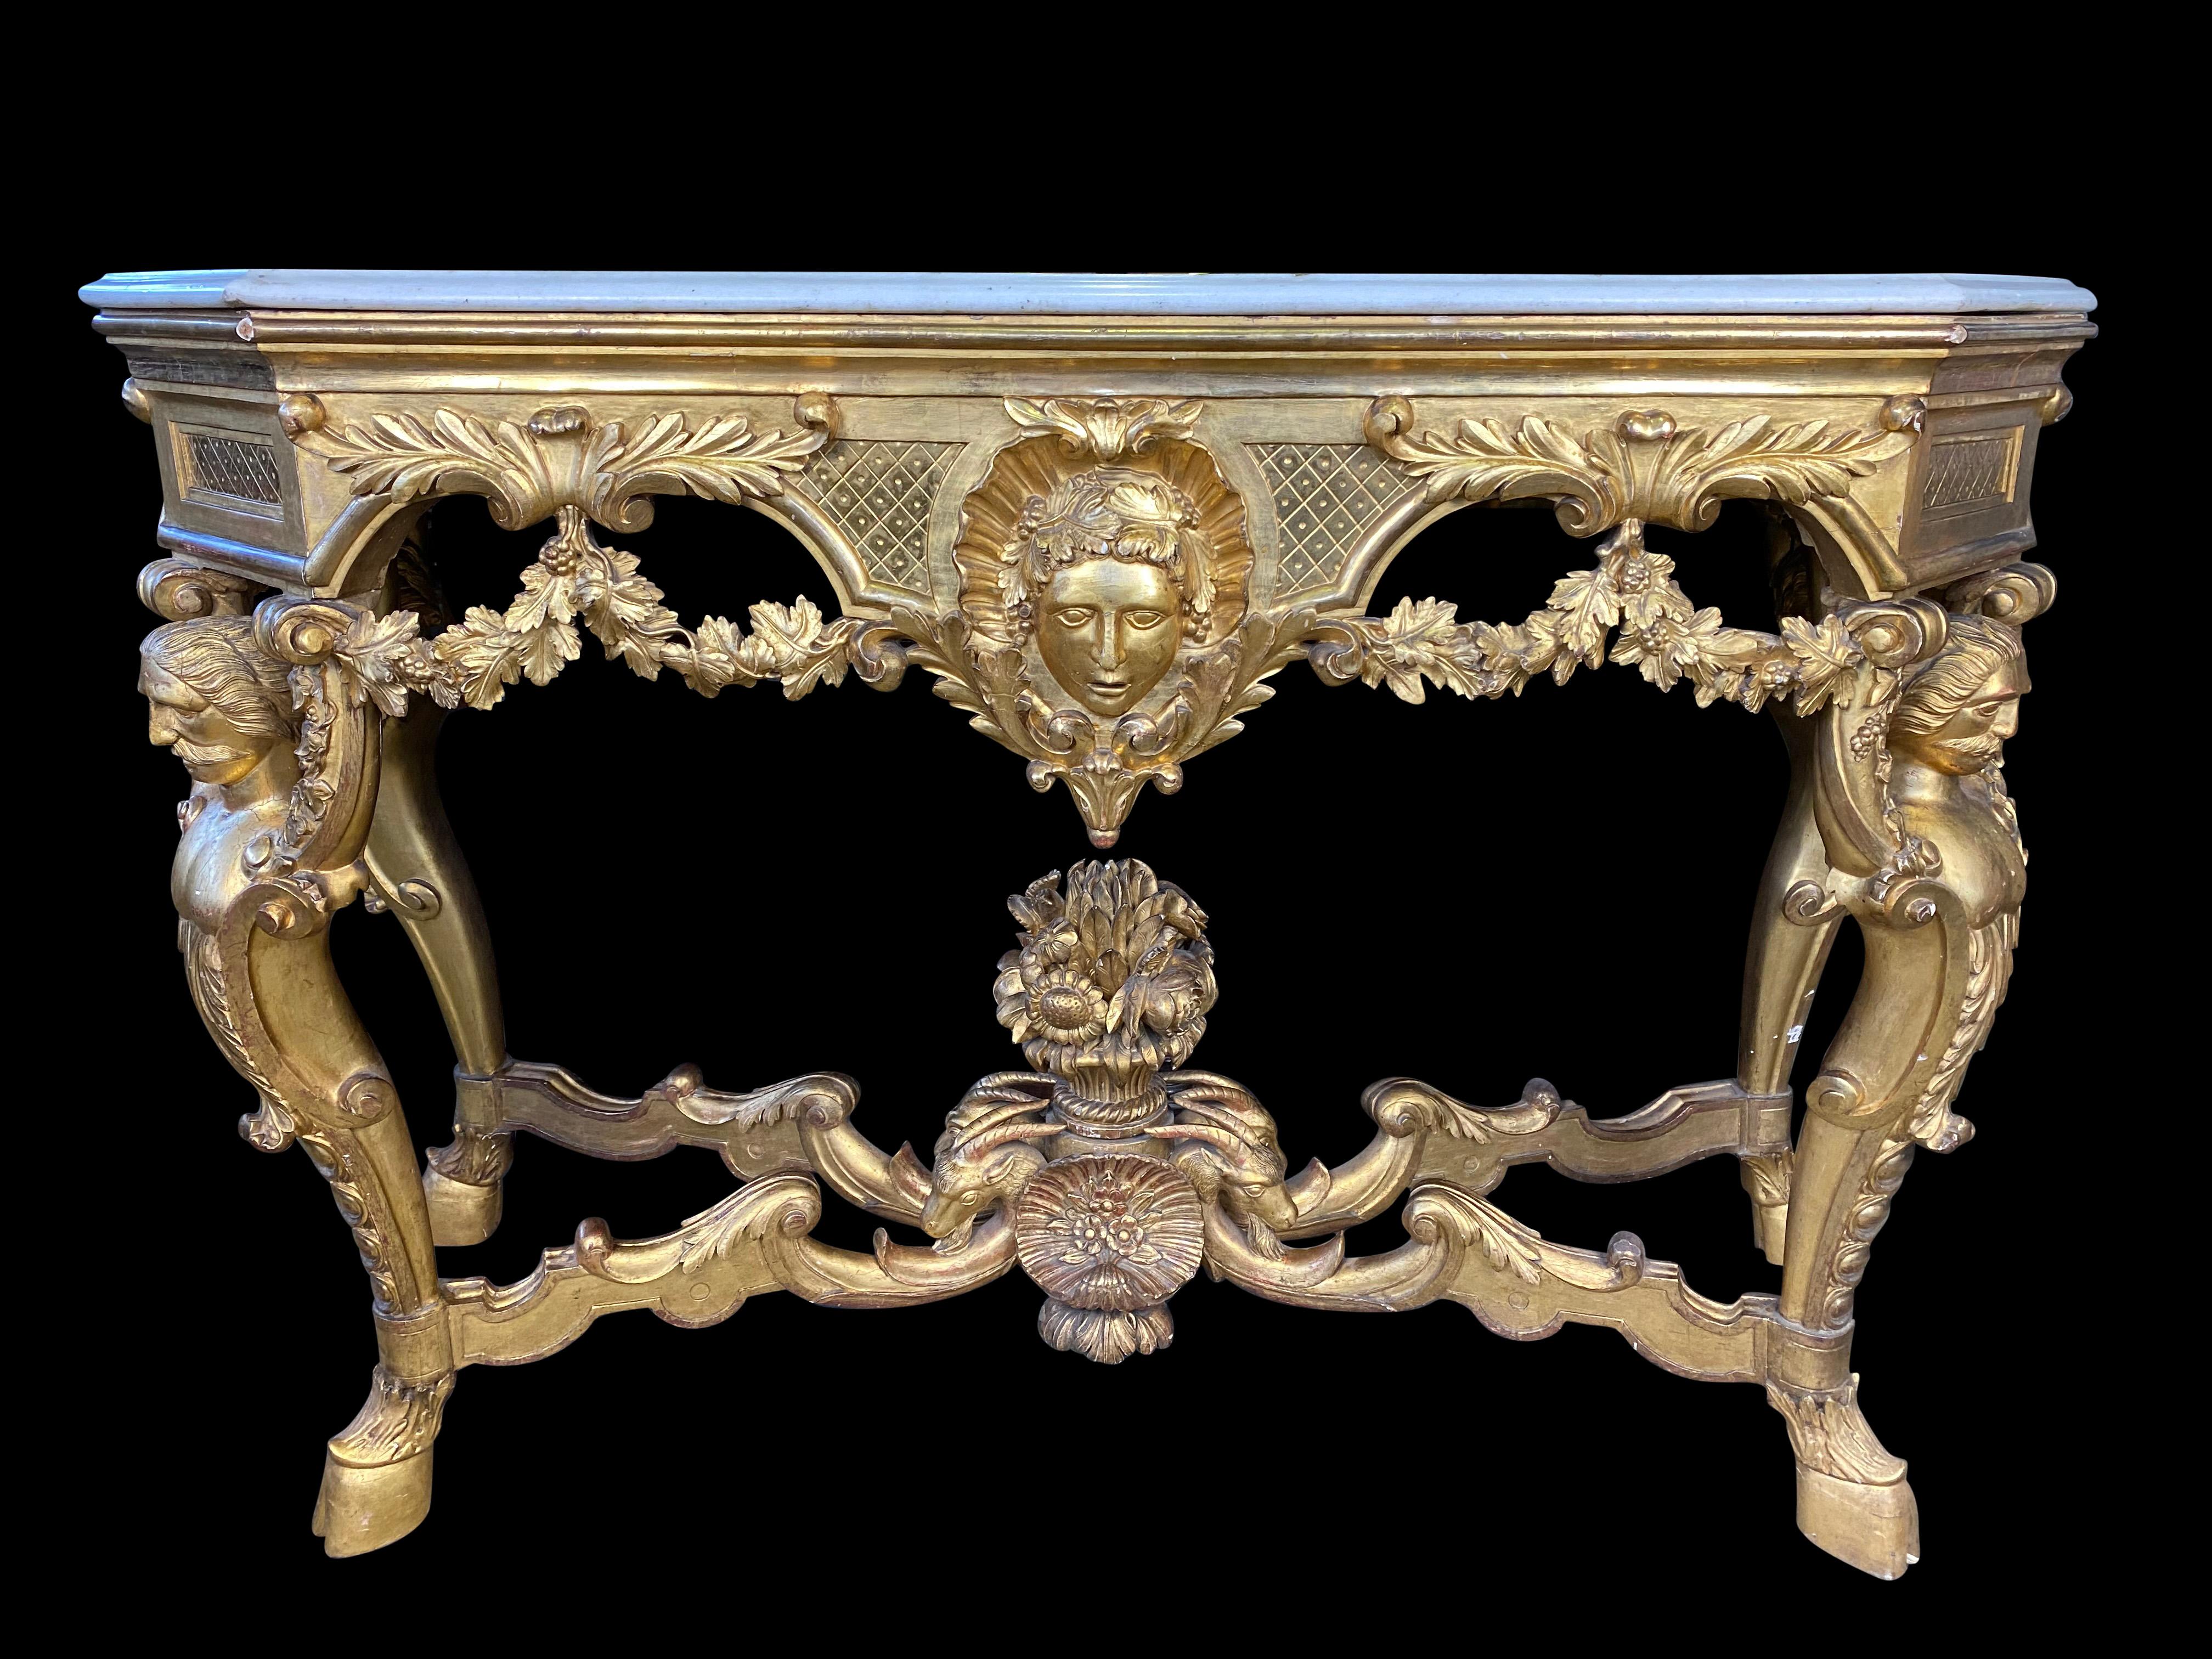 An elaborately carved and gilded Italian console in the Rococo taste, the shaped white marble top lies above a flower-filled pattern with trailing blossoms, alongside the gilded decoration. Exceptionally hand crafted from the 18th-19th century.